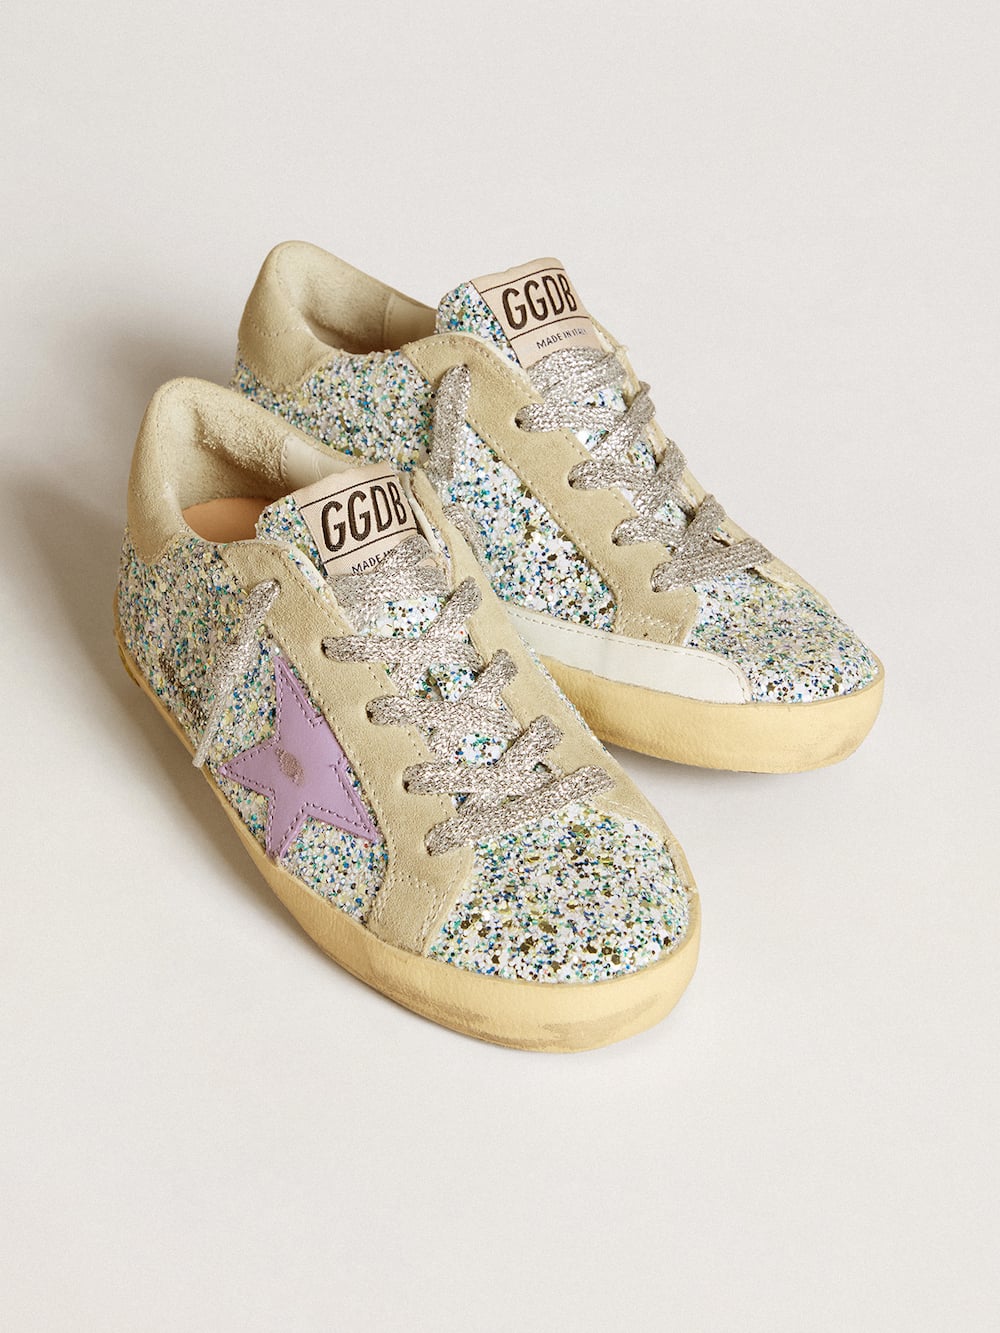 Golden Goose - Super-Star LTD in multicolored glitter with lilac leather star in 